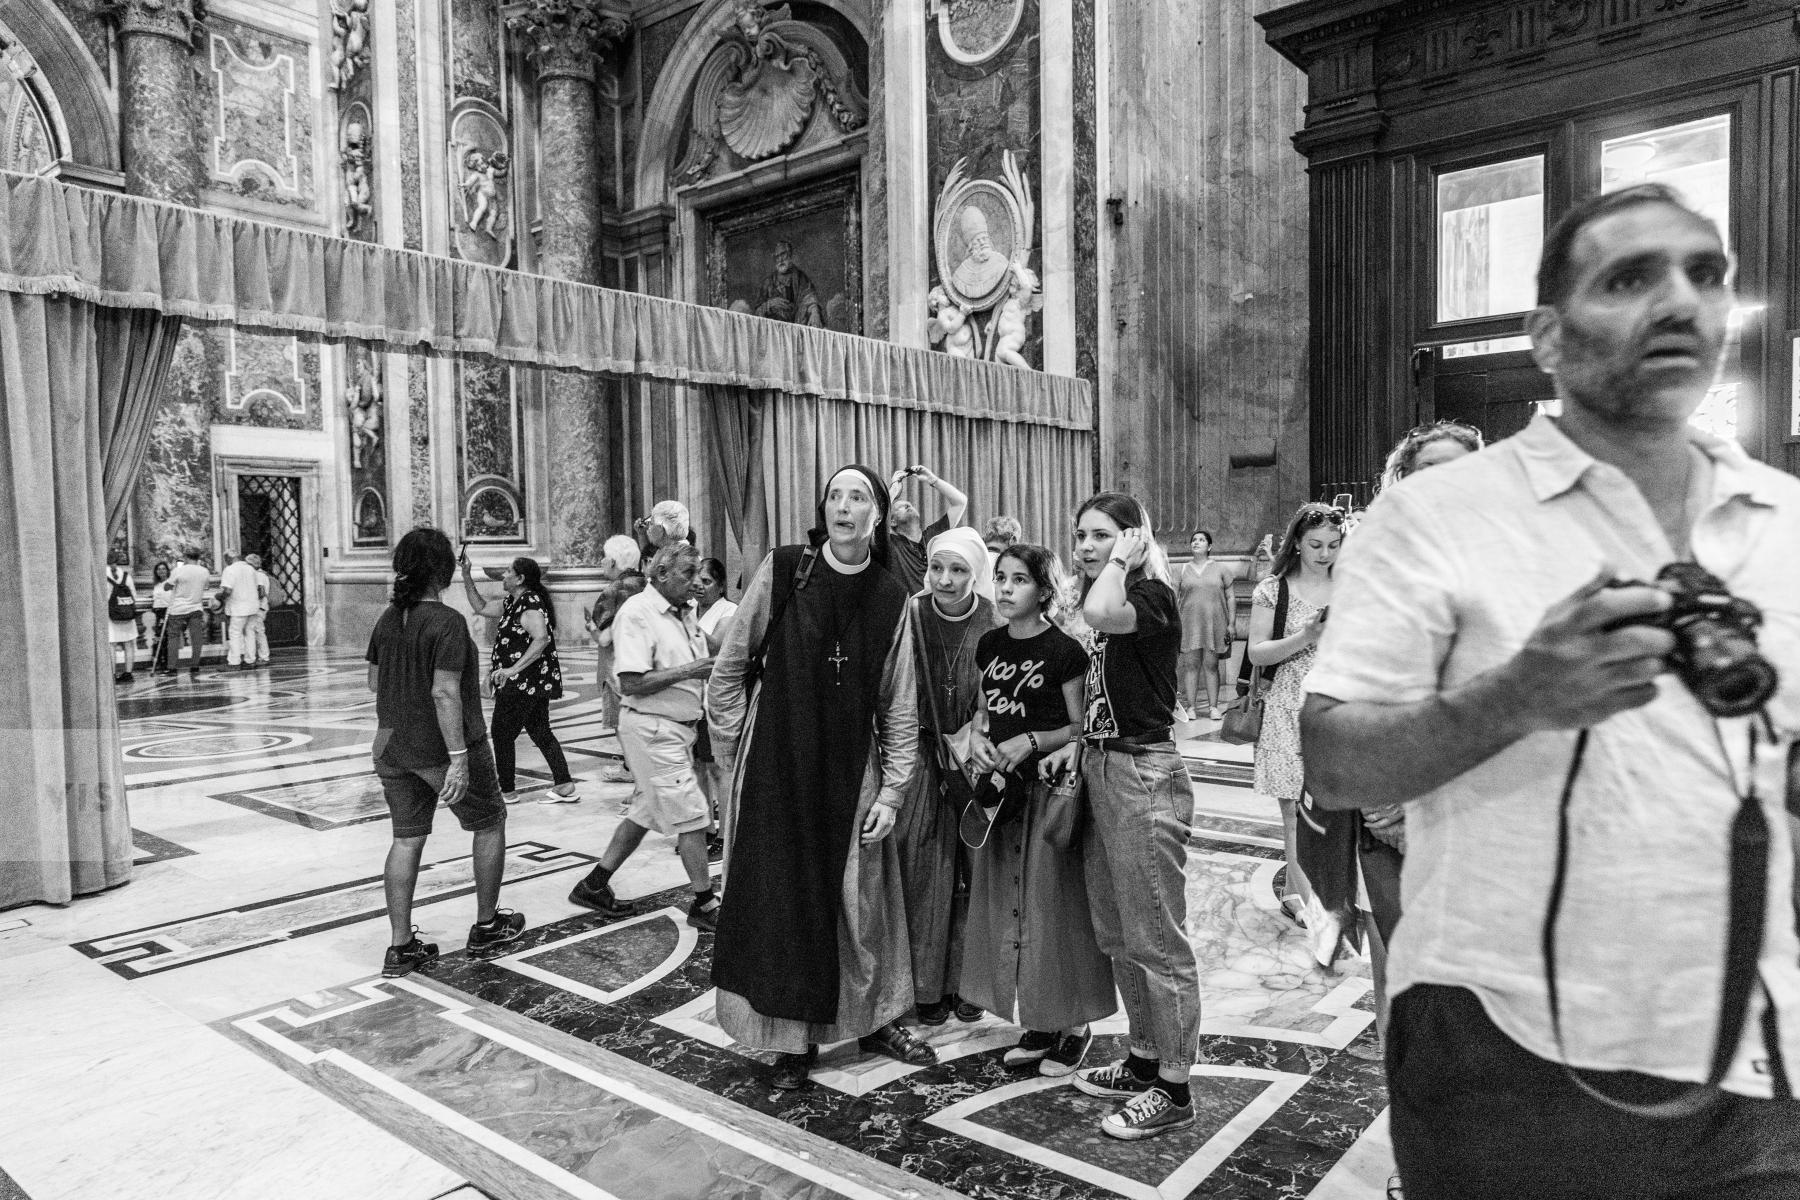 Purchase Stepping Inside St. Peter's Basilica by Katie Linsky Shaw